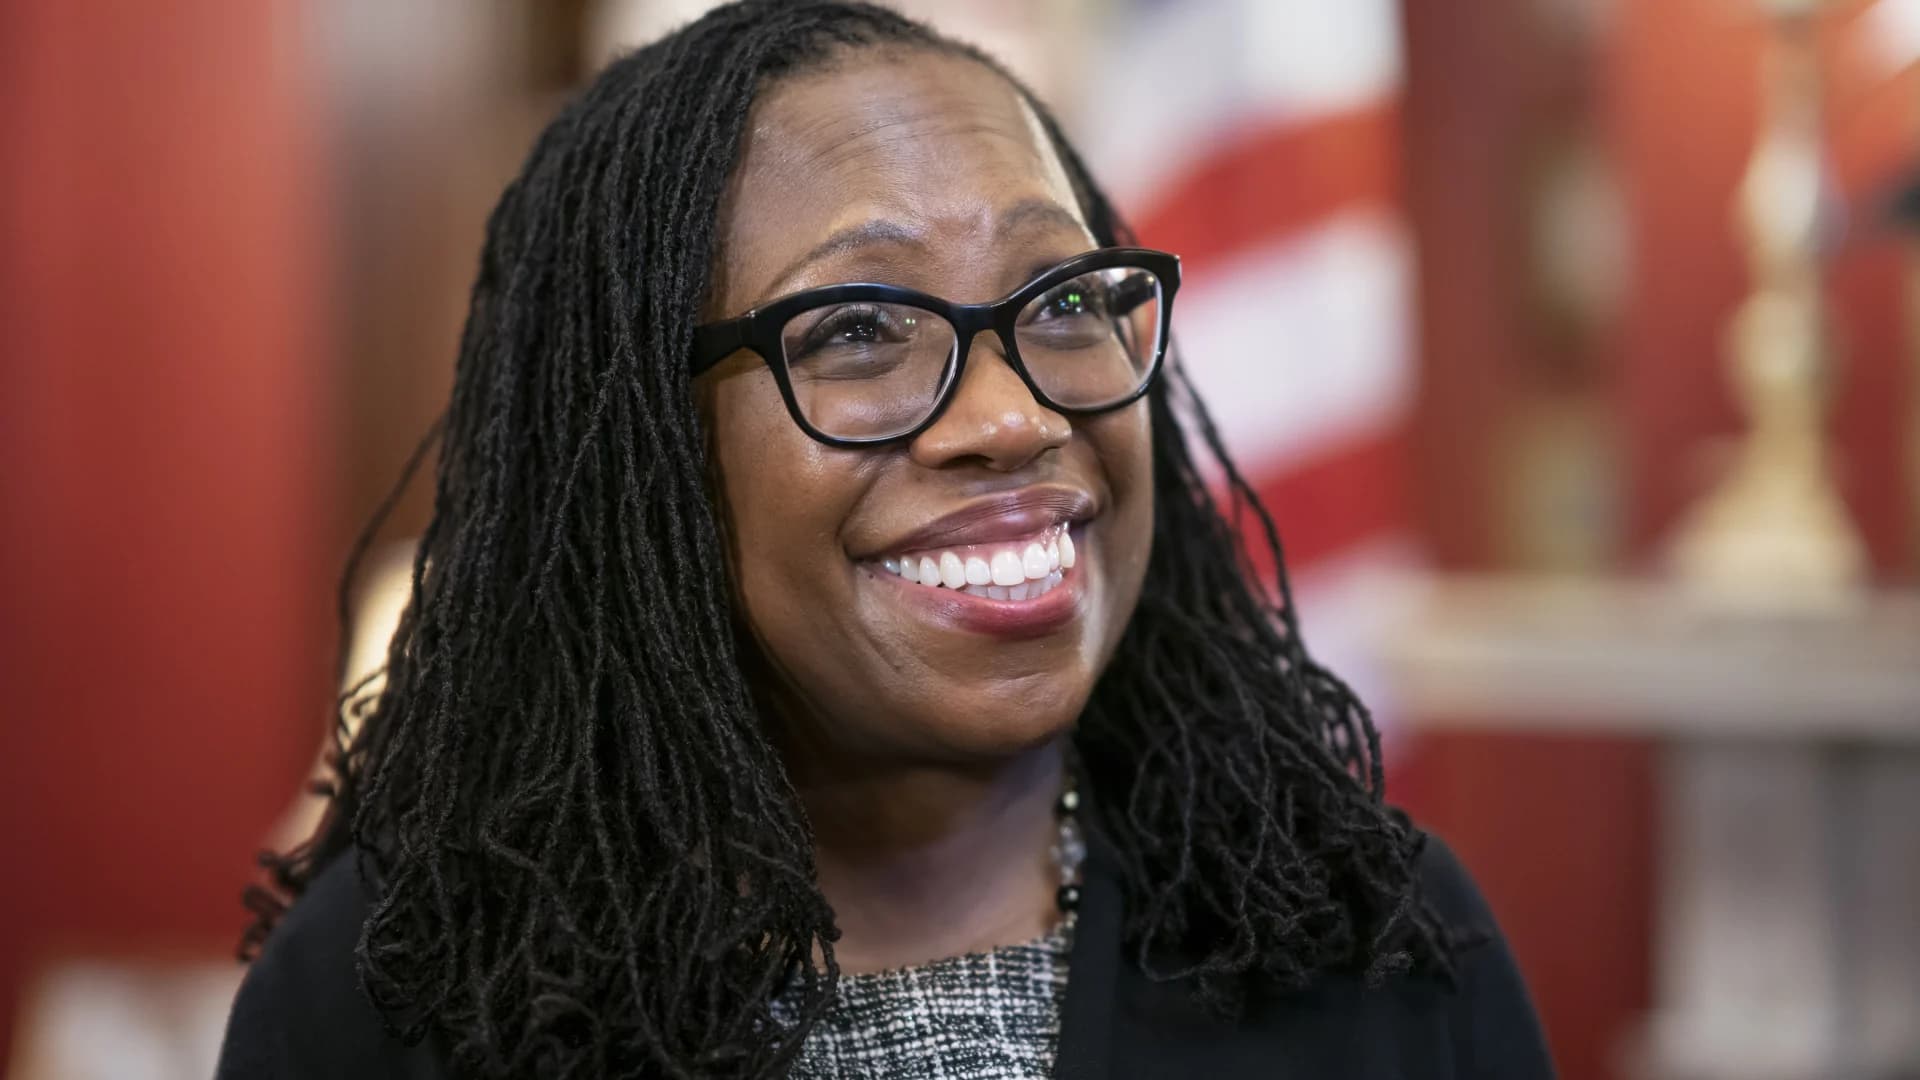 WATCH LIVE: Ketanji Brown Jackson to be sworn in as first Black woman to serve on Supreme Court